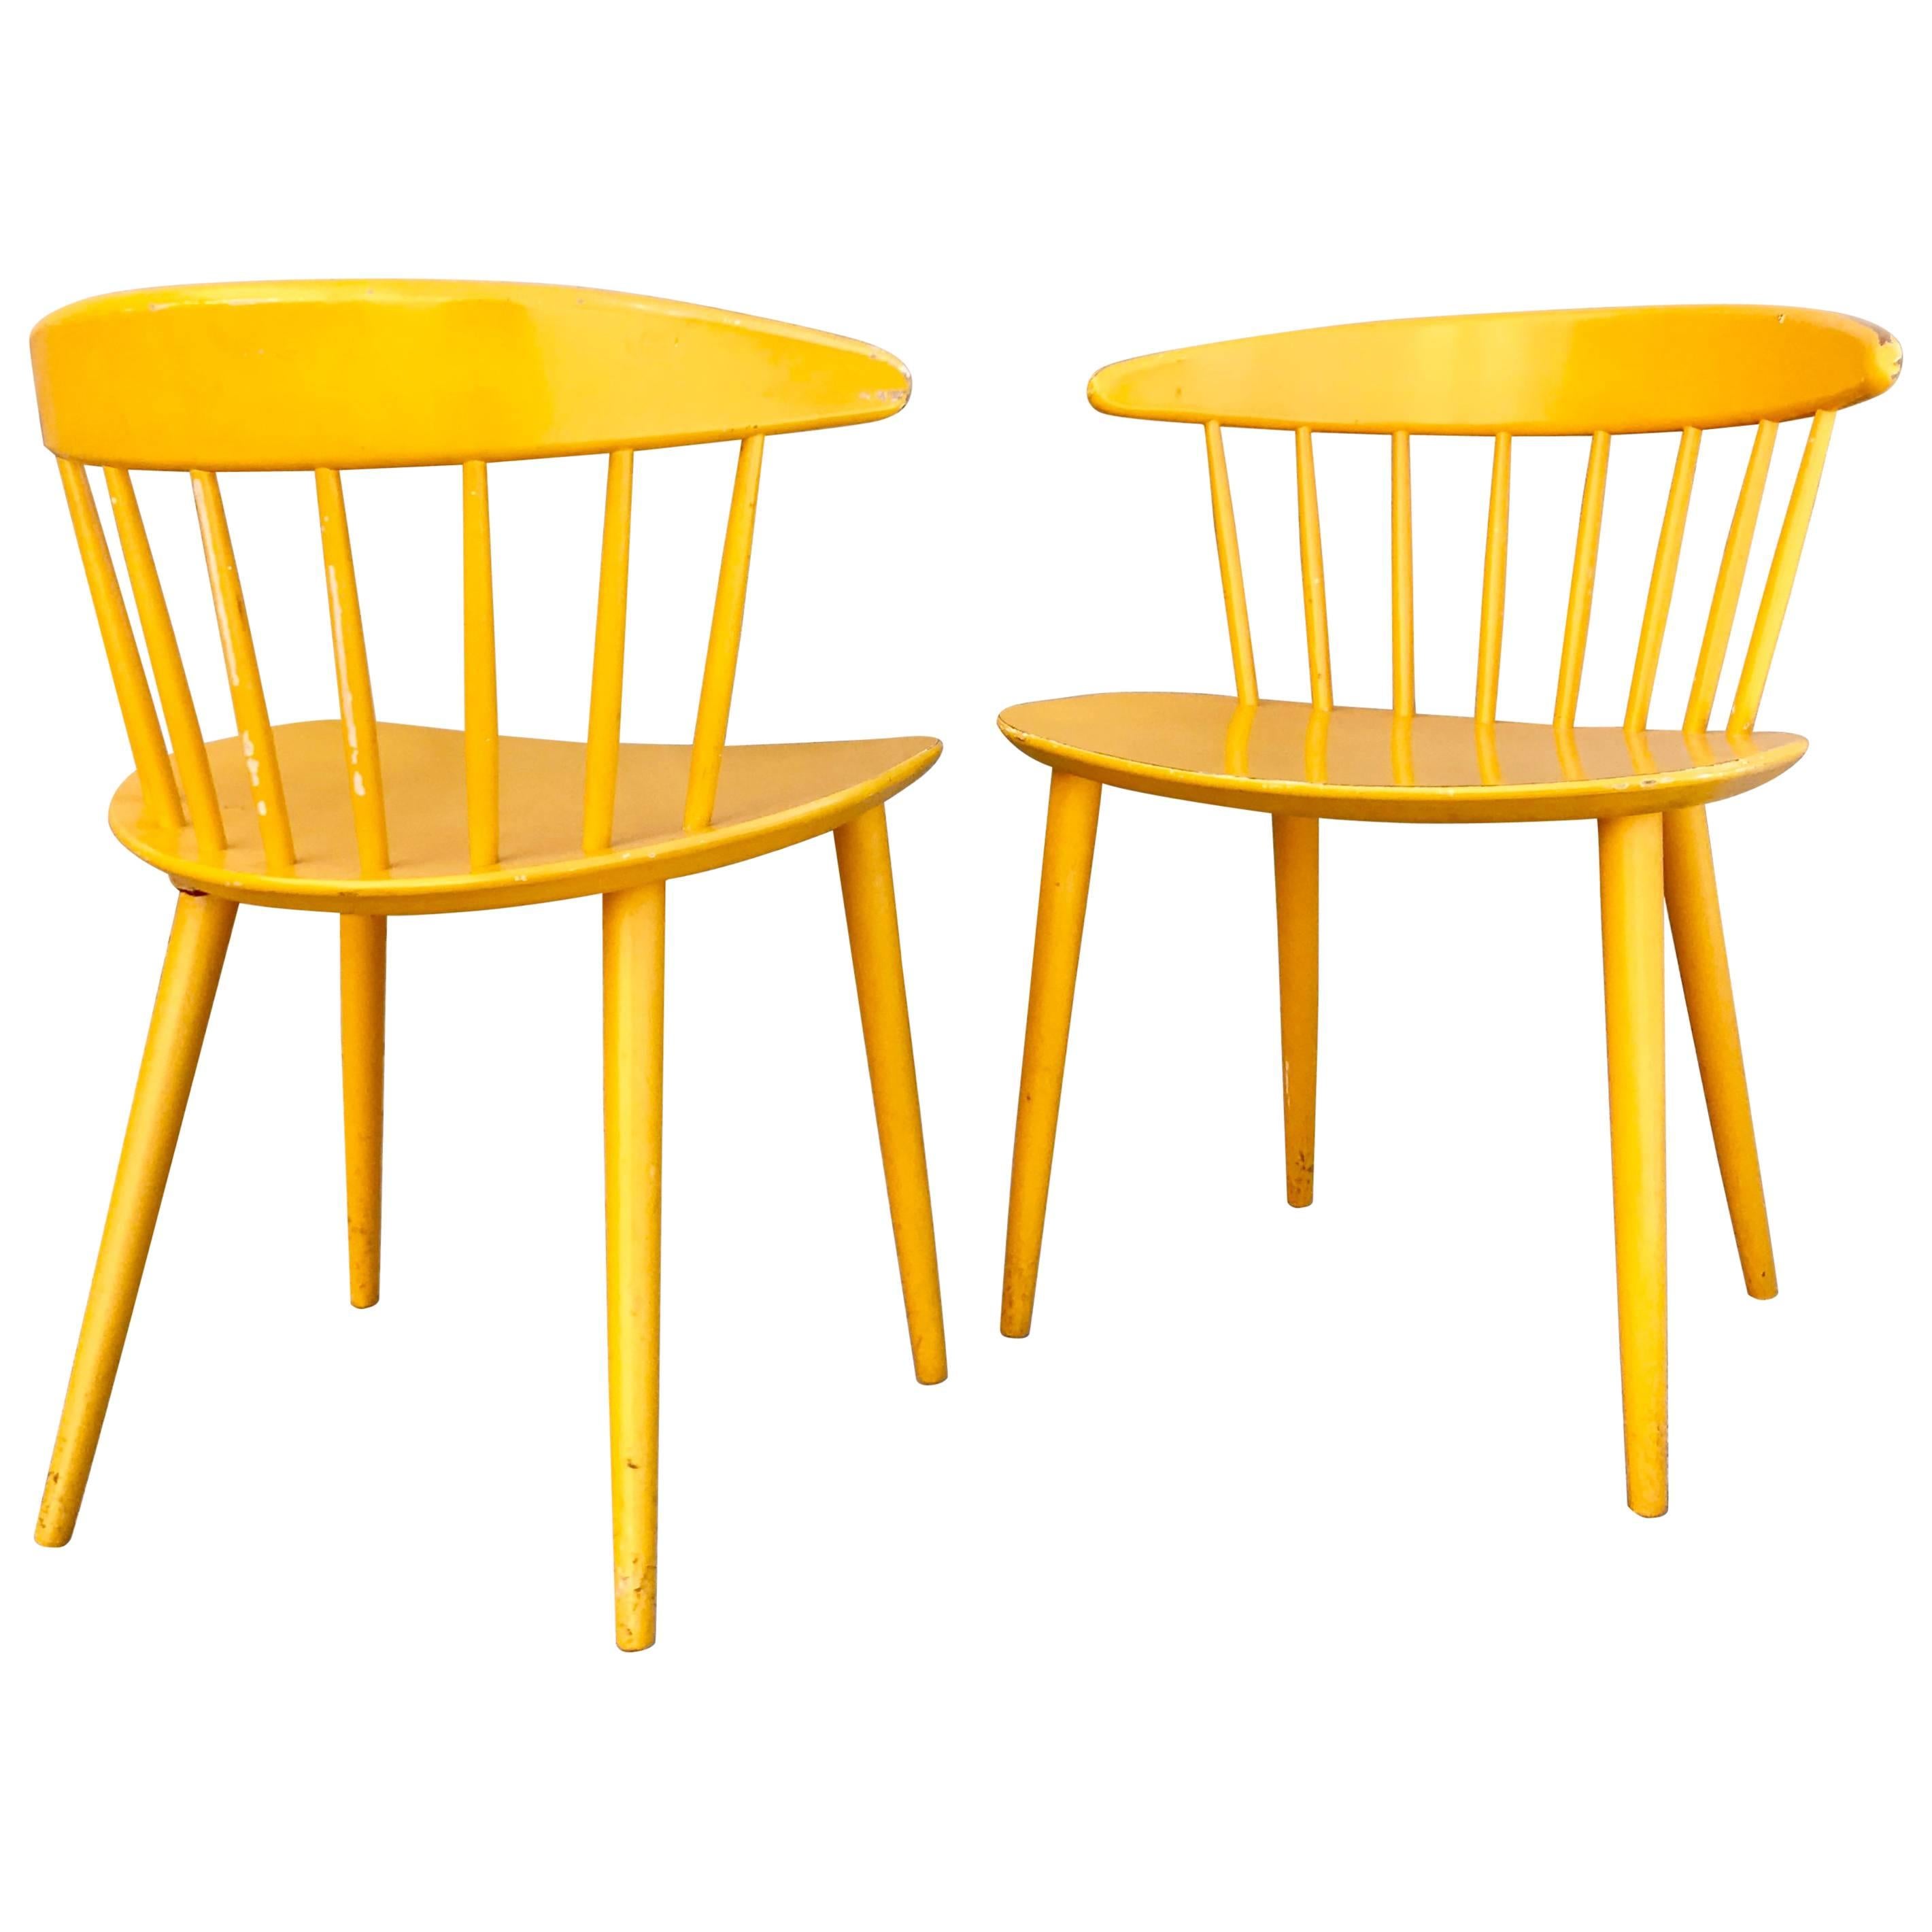 Pair Vibrant 1950s Ejvind Johansson Painted Yellow Danish Modern Painted Chairs